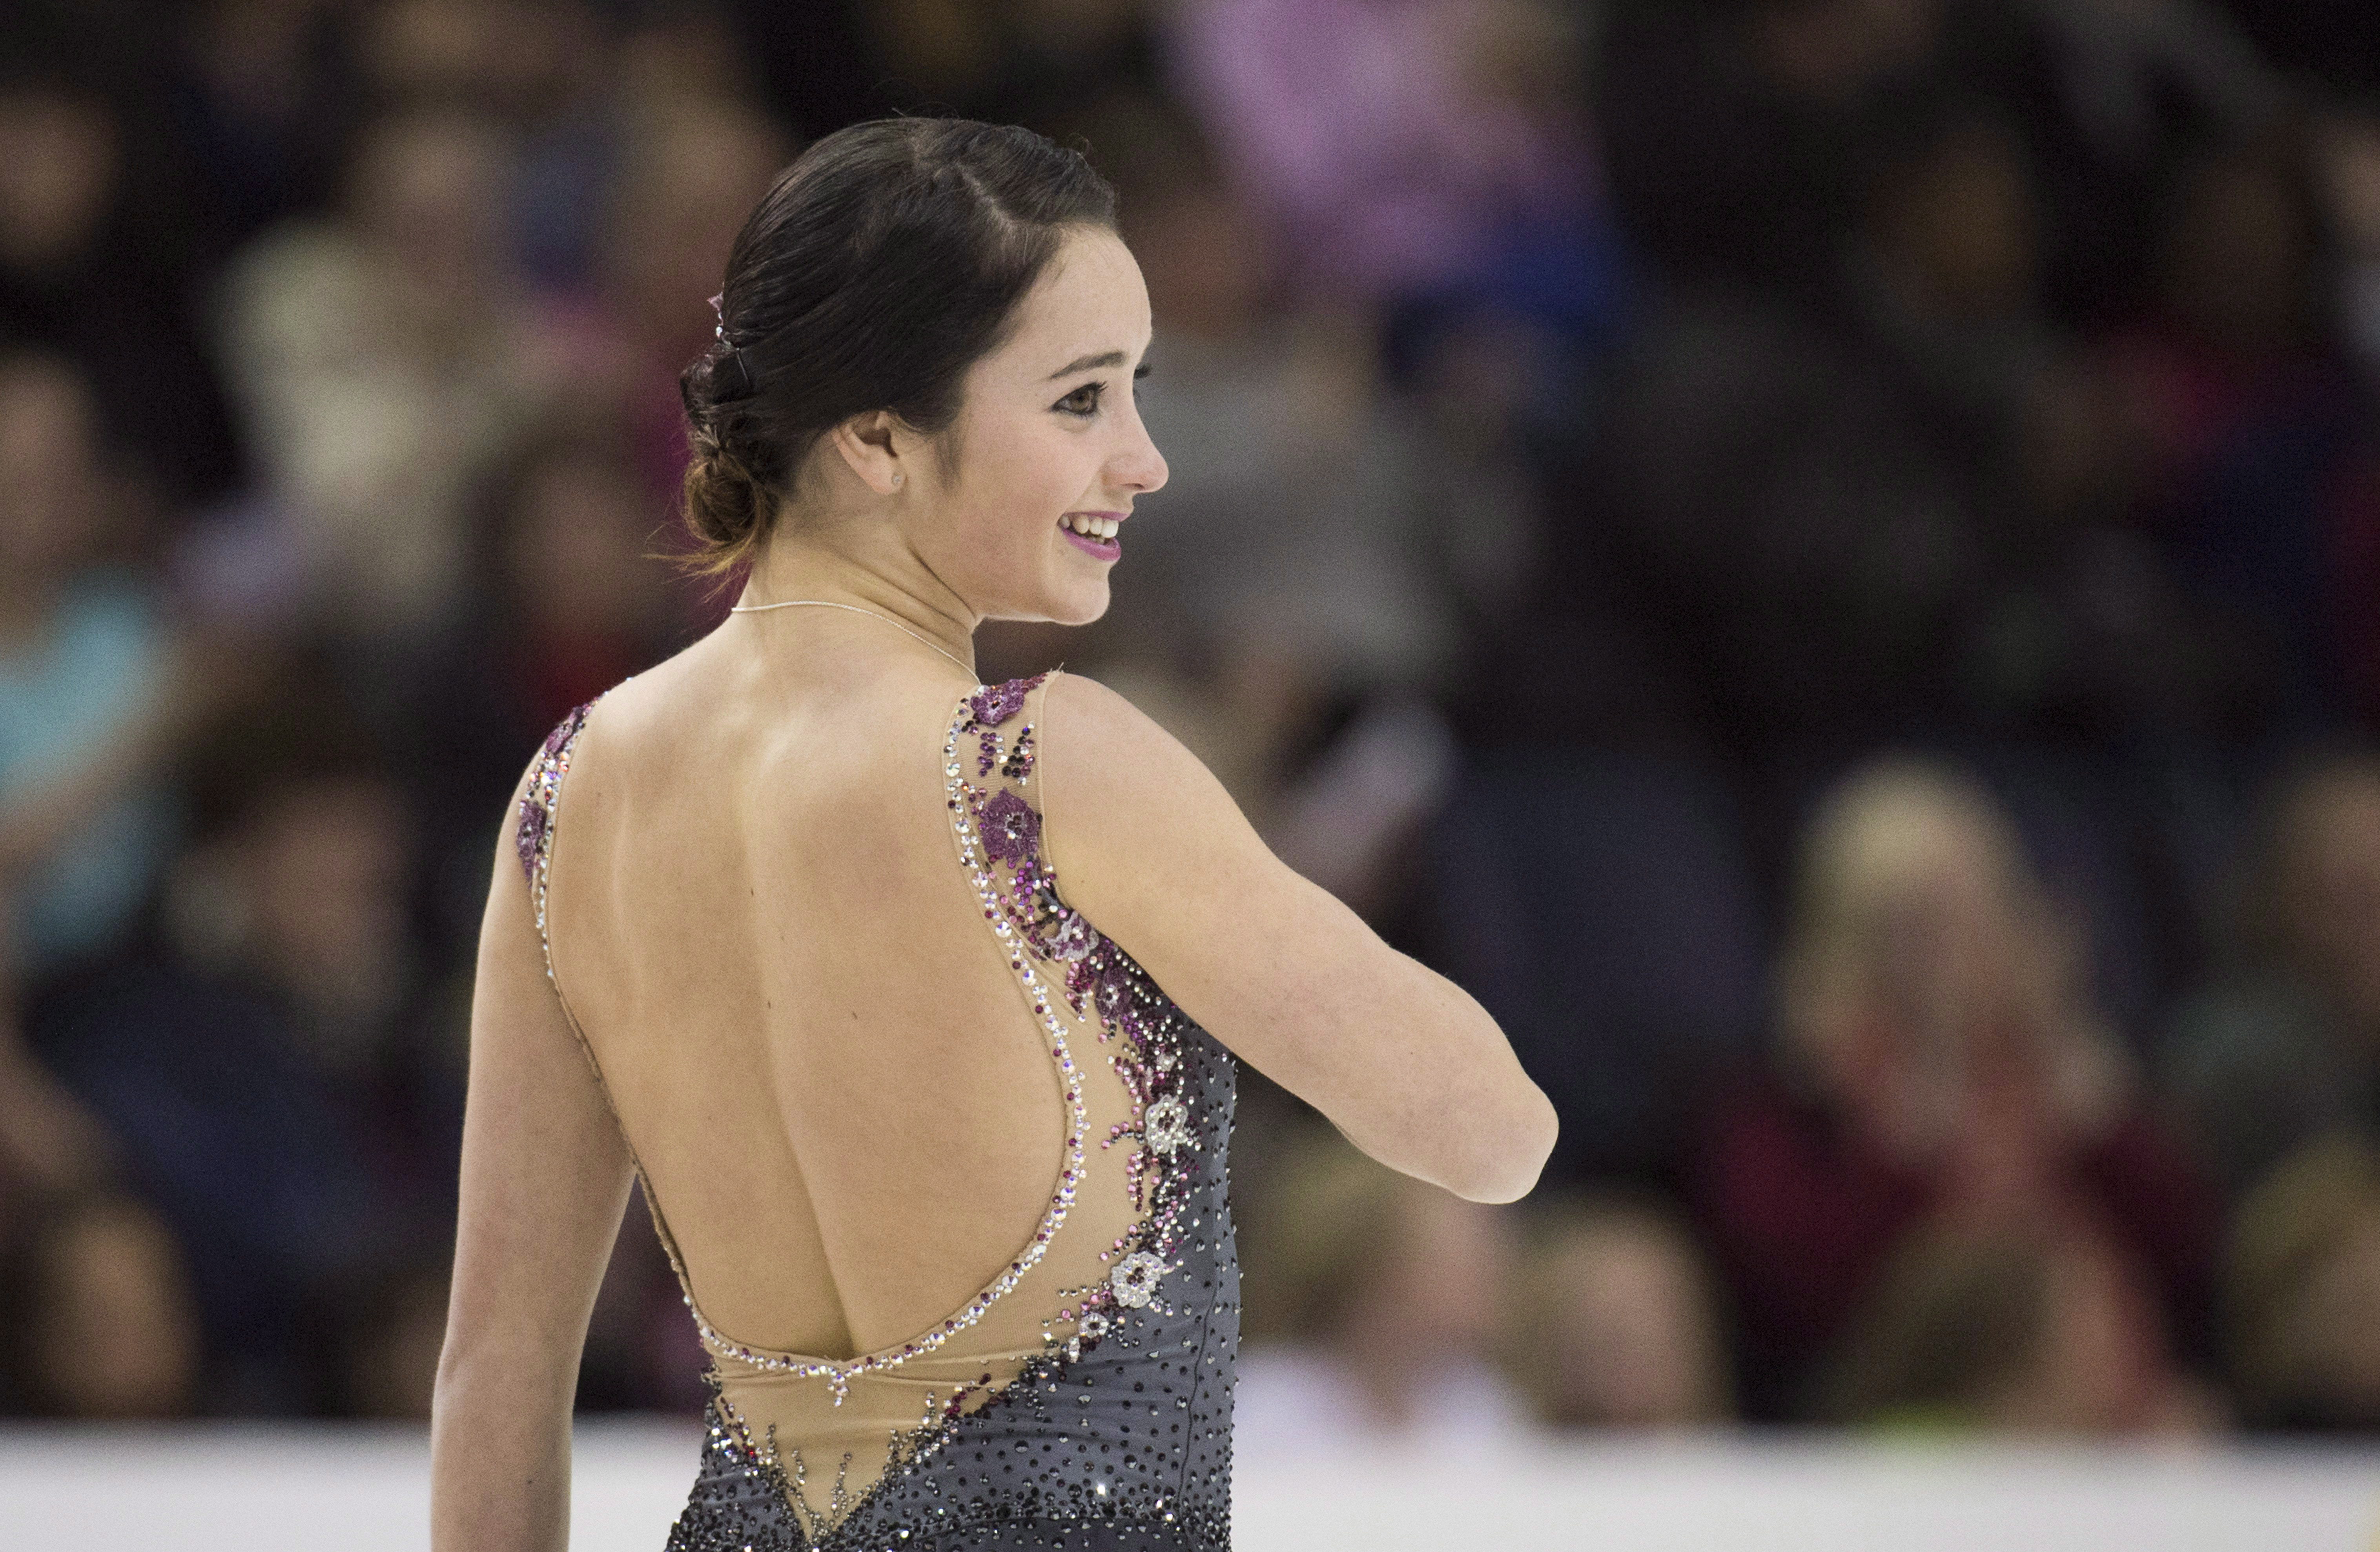 Kaetlyn Osmond reacts after performing her short program during the Canadian Figure Skating Championships in Halifax on Friday, January 22, 2016. THE CANADIAN PRESS/Darren Calabrese